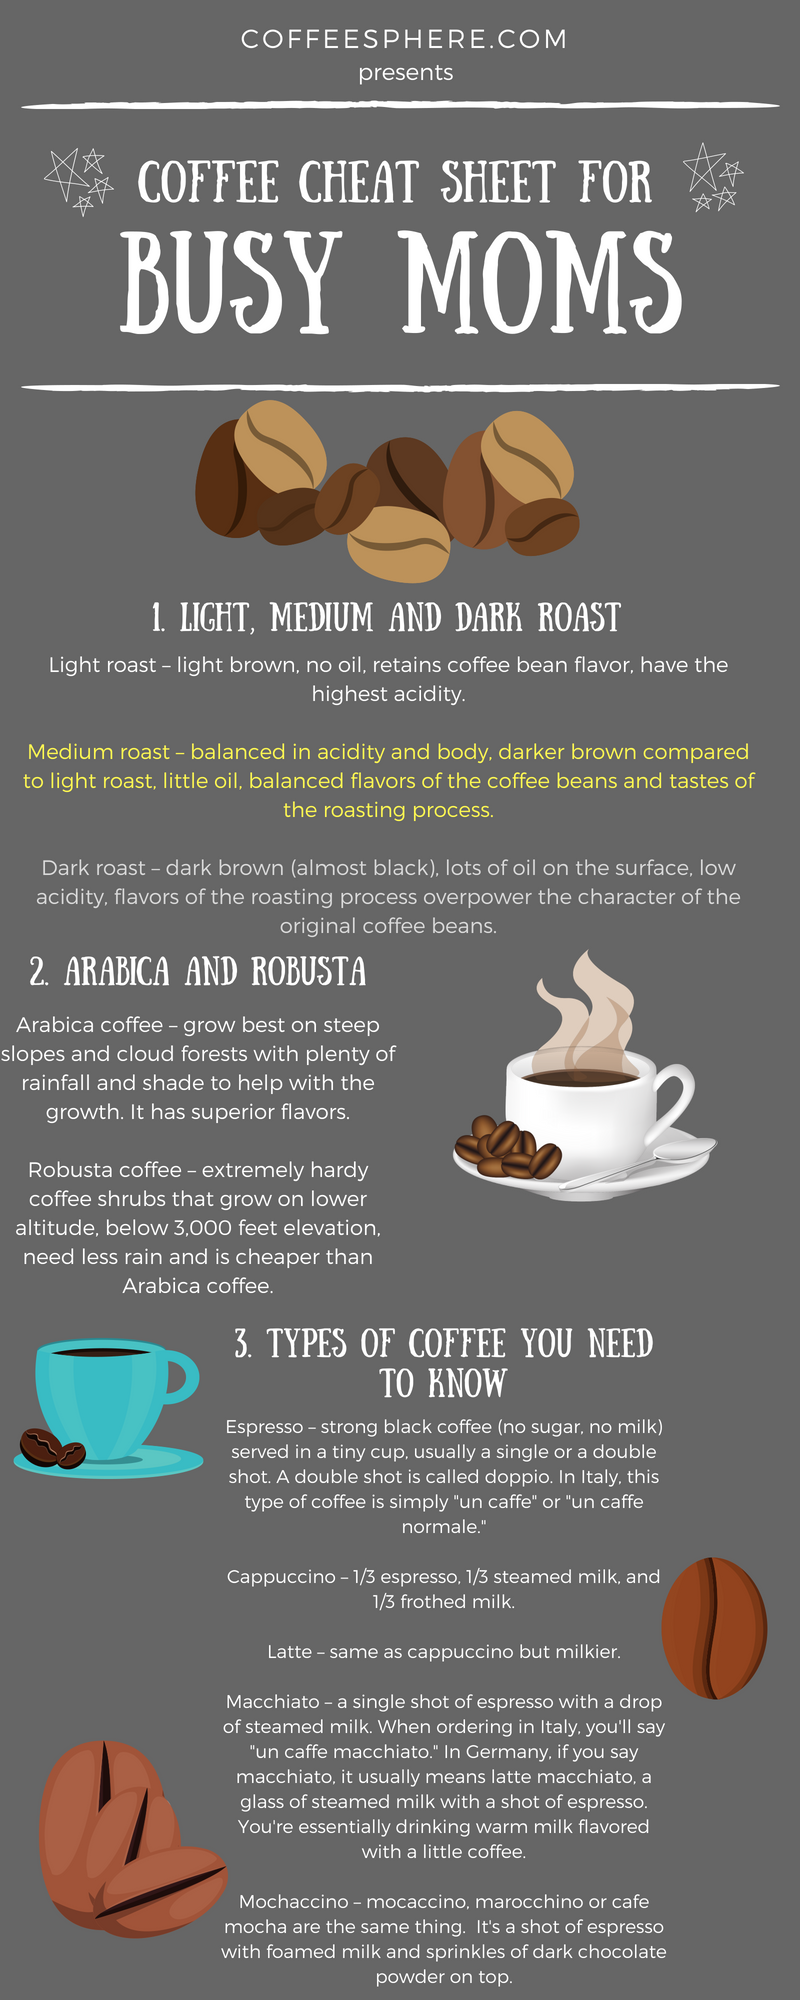 Coffee Cheat Sheet for Busy Moms CoffeeSphere